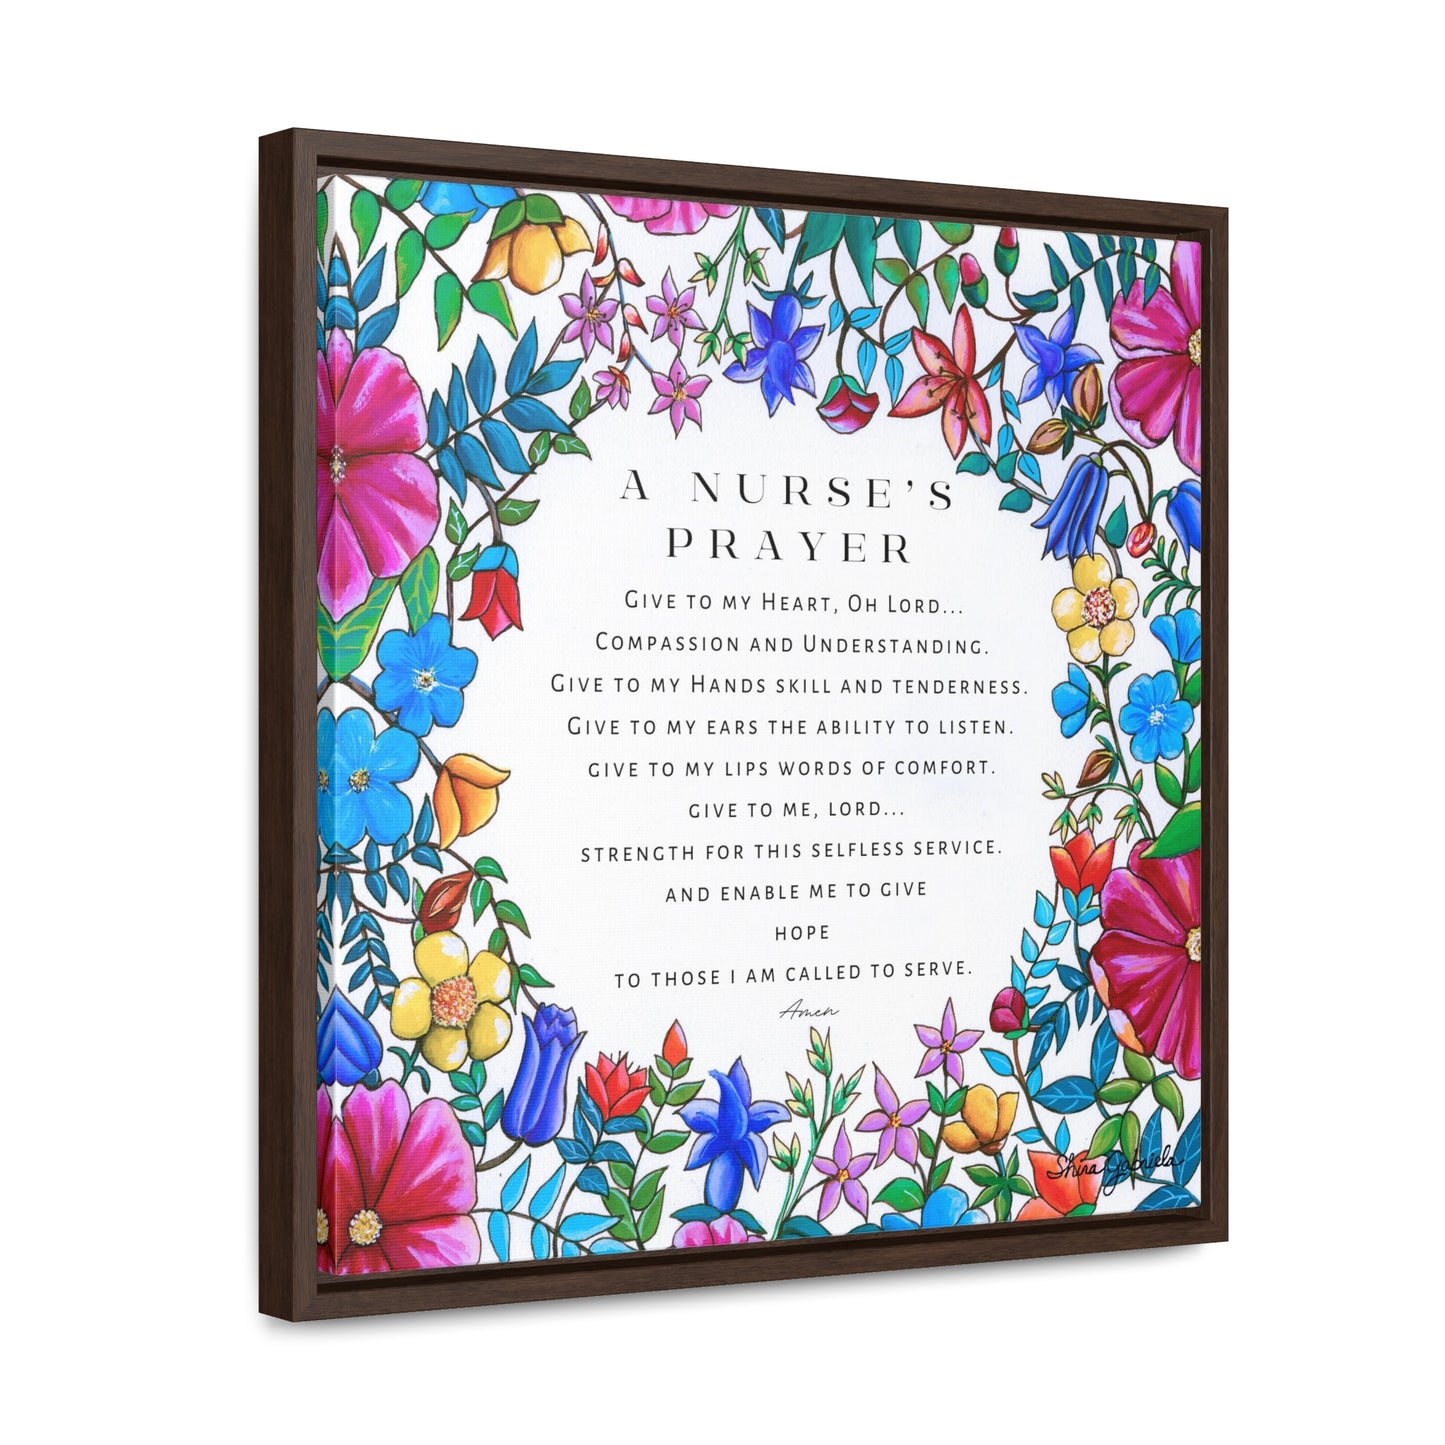 A Nurse's Prayer by Shira Gabriela Gallery Wrapped Canvas in Square Frame